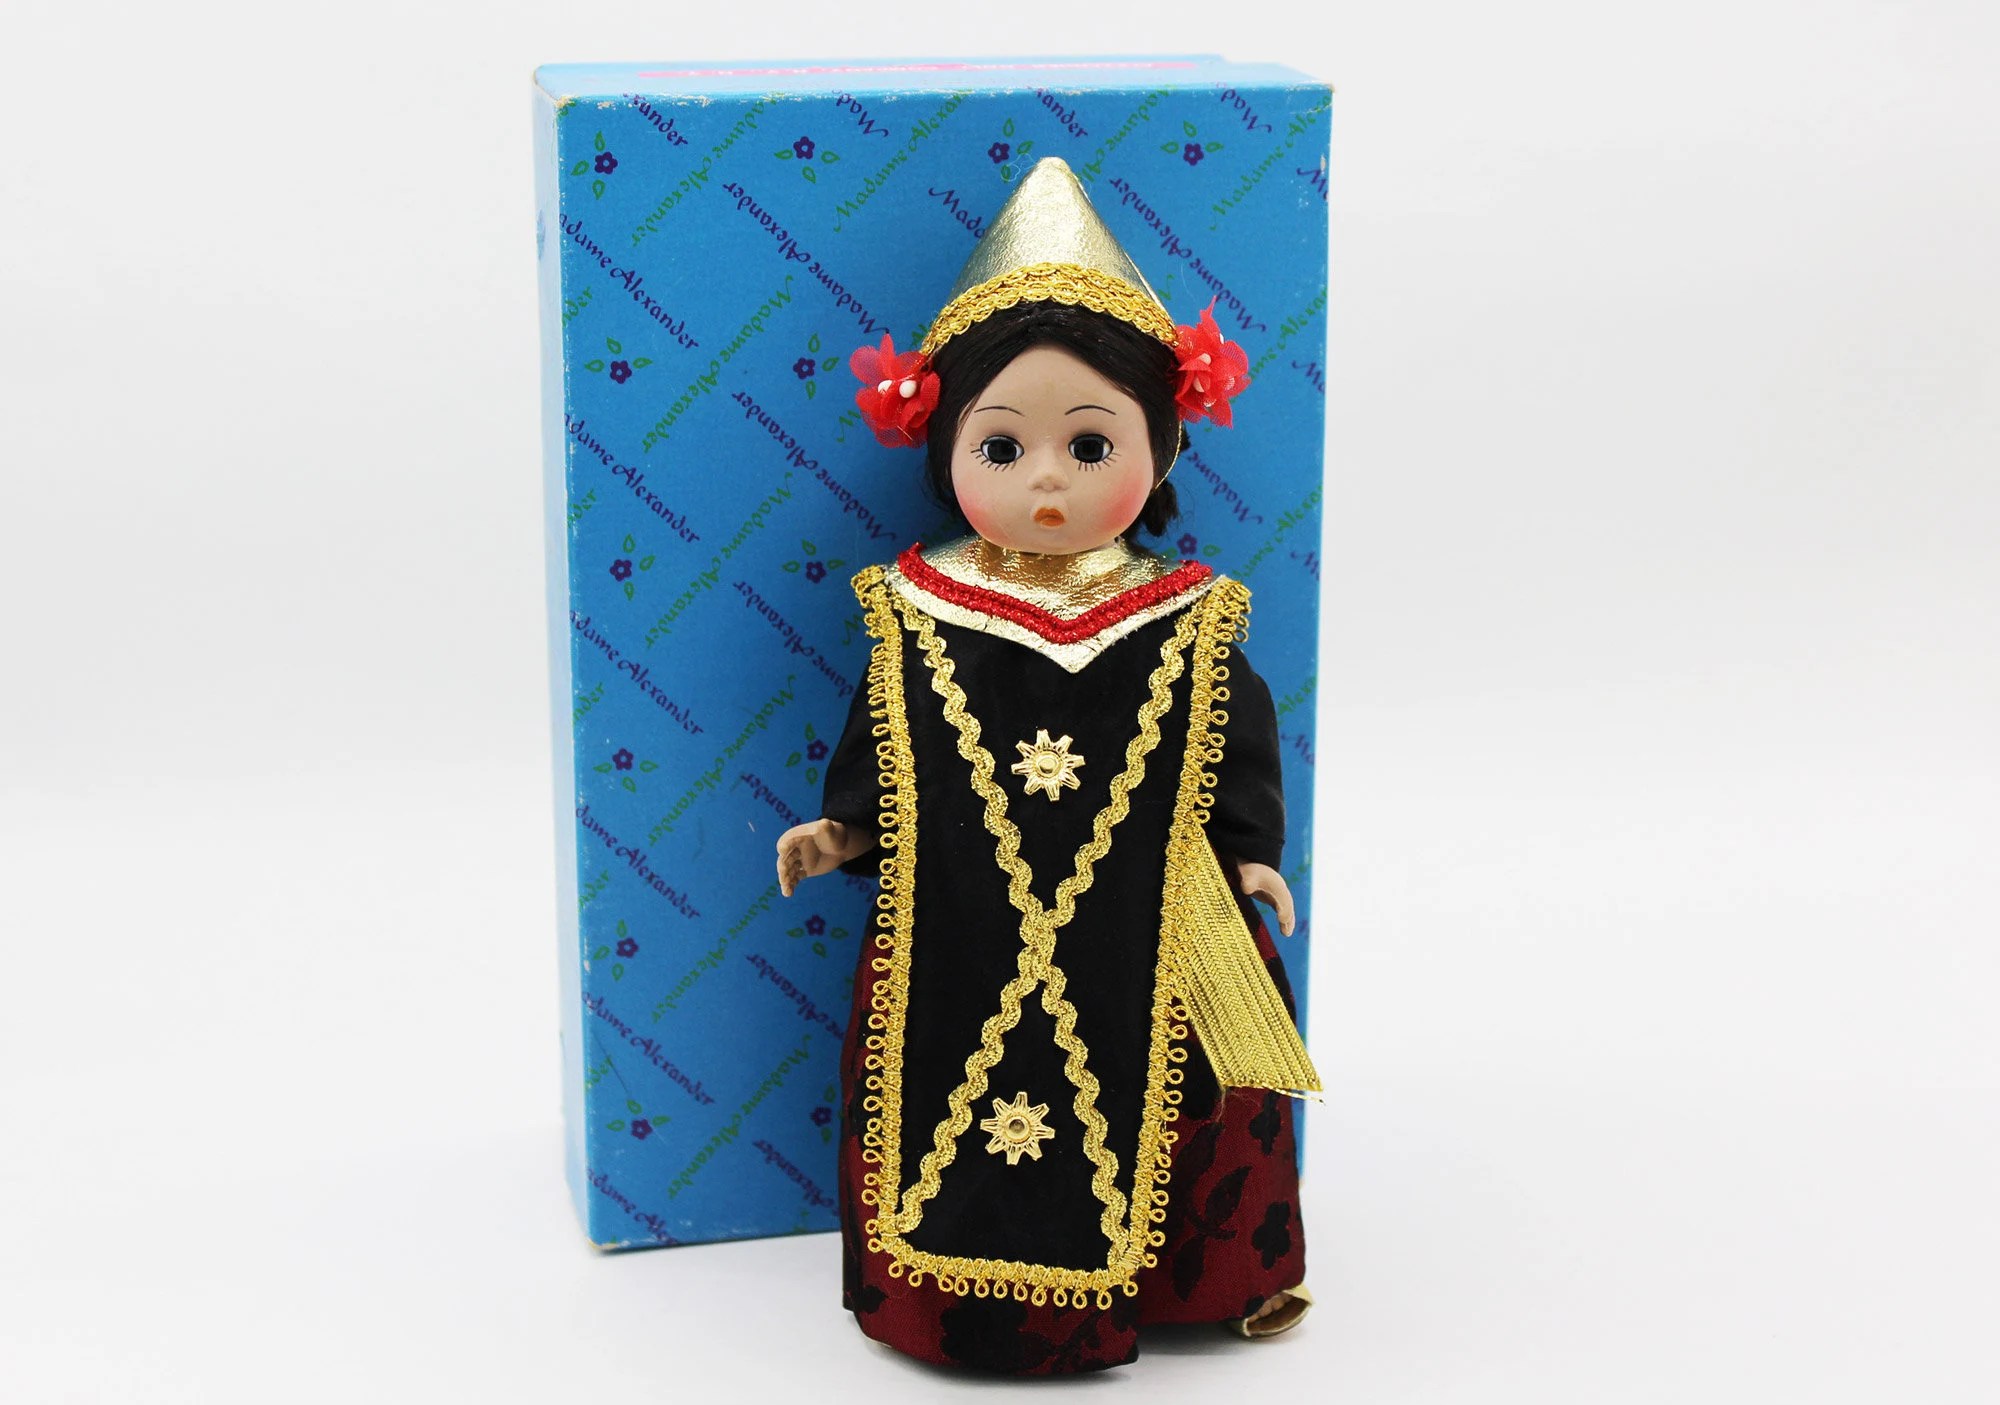 Madame Alexander – Indonesia #579 – International Series – Restrung - Vintage Doll w/ Box at A Dolly Hobby